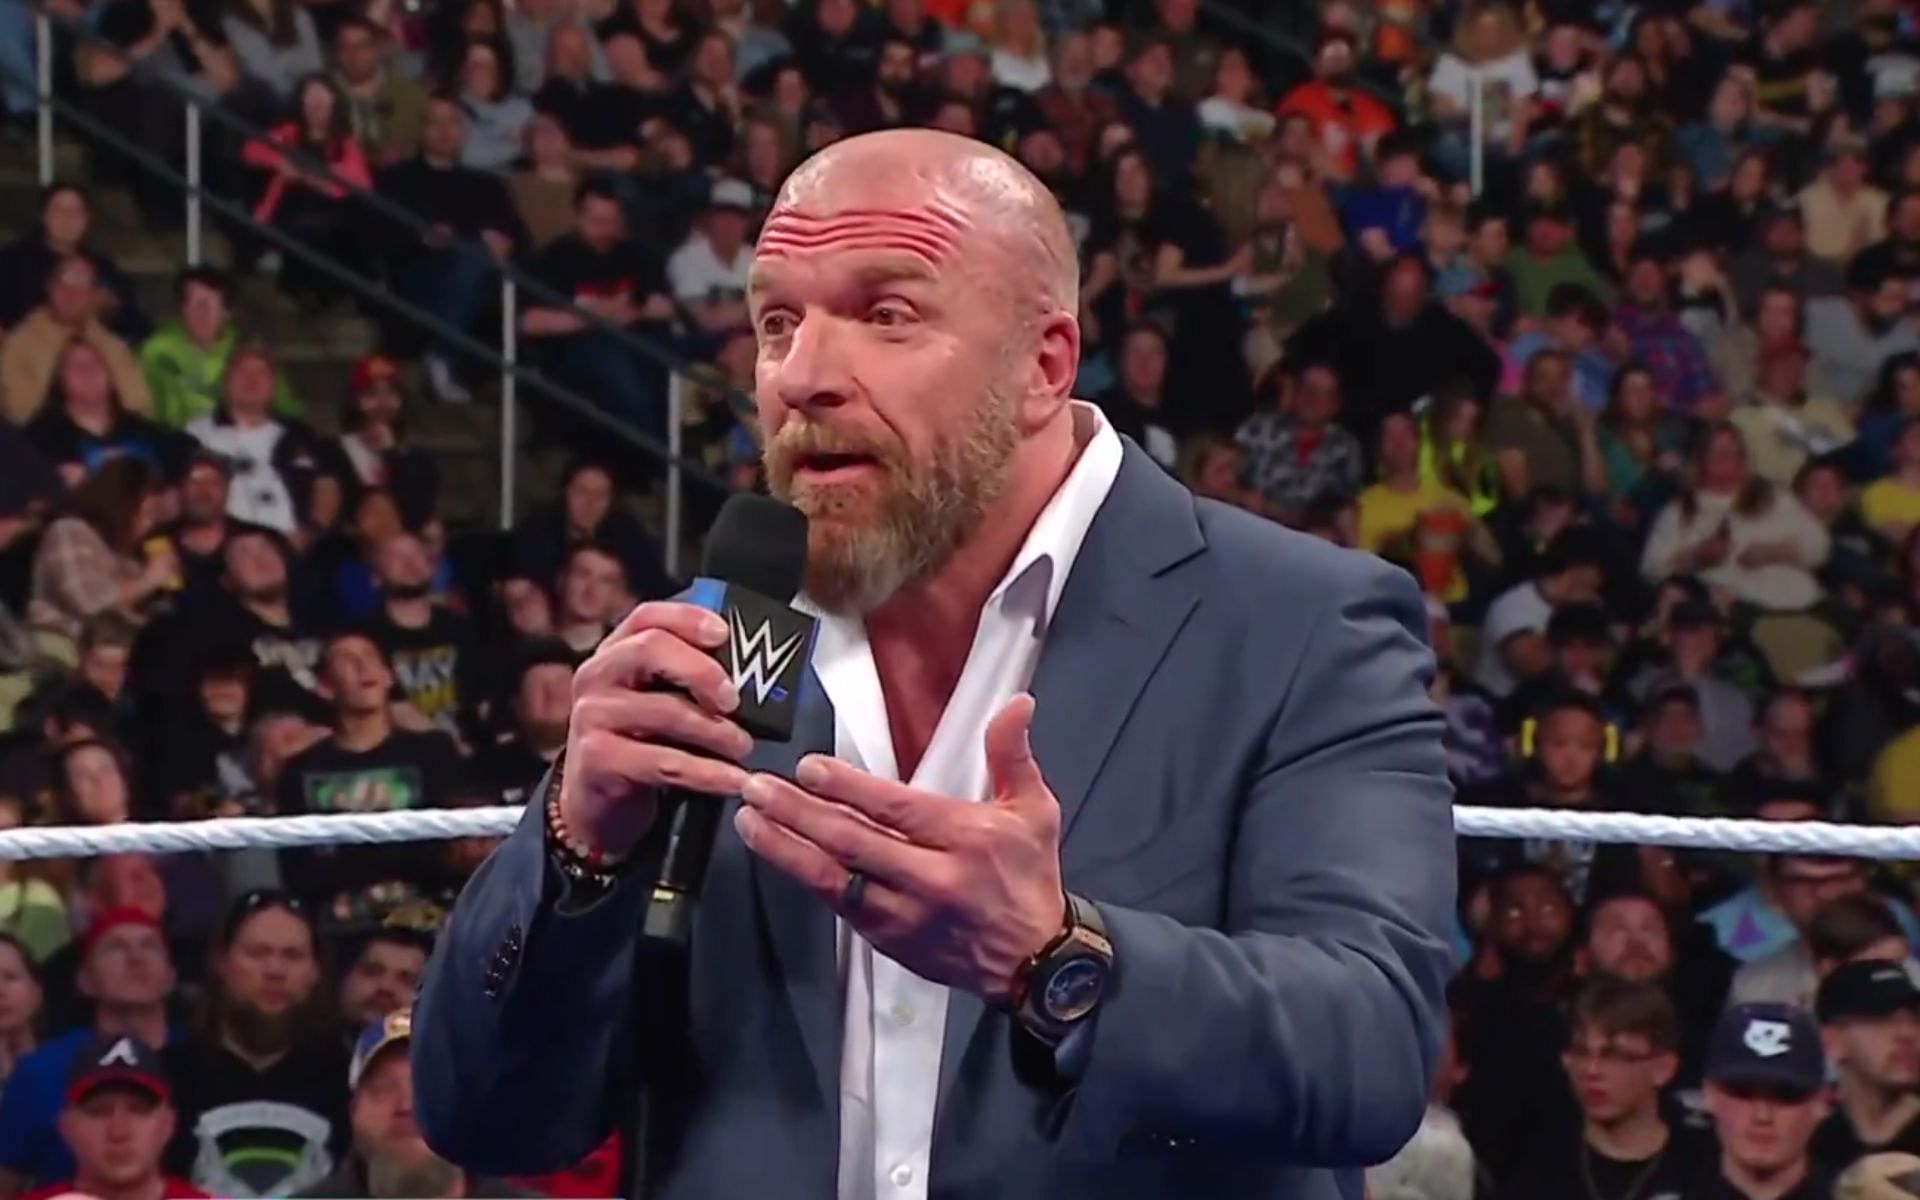 Triple H officially introduces a brand new championship on SmackDown and it looks incredible